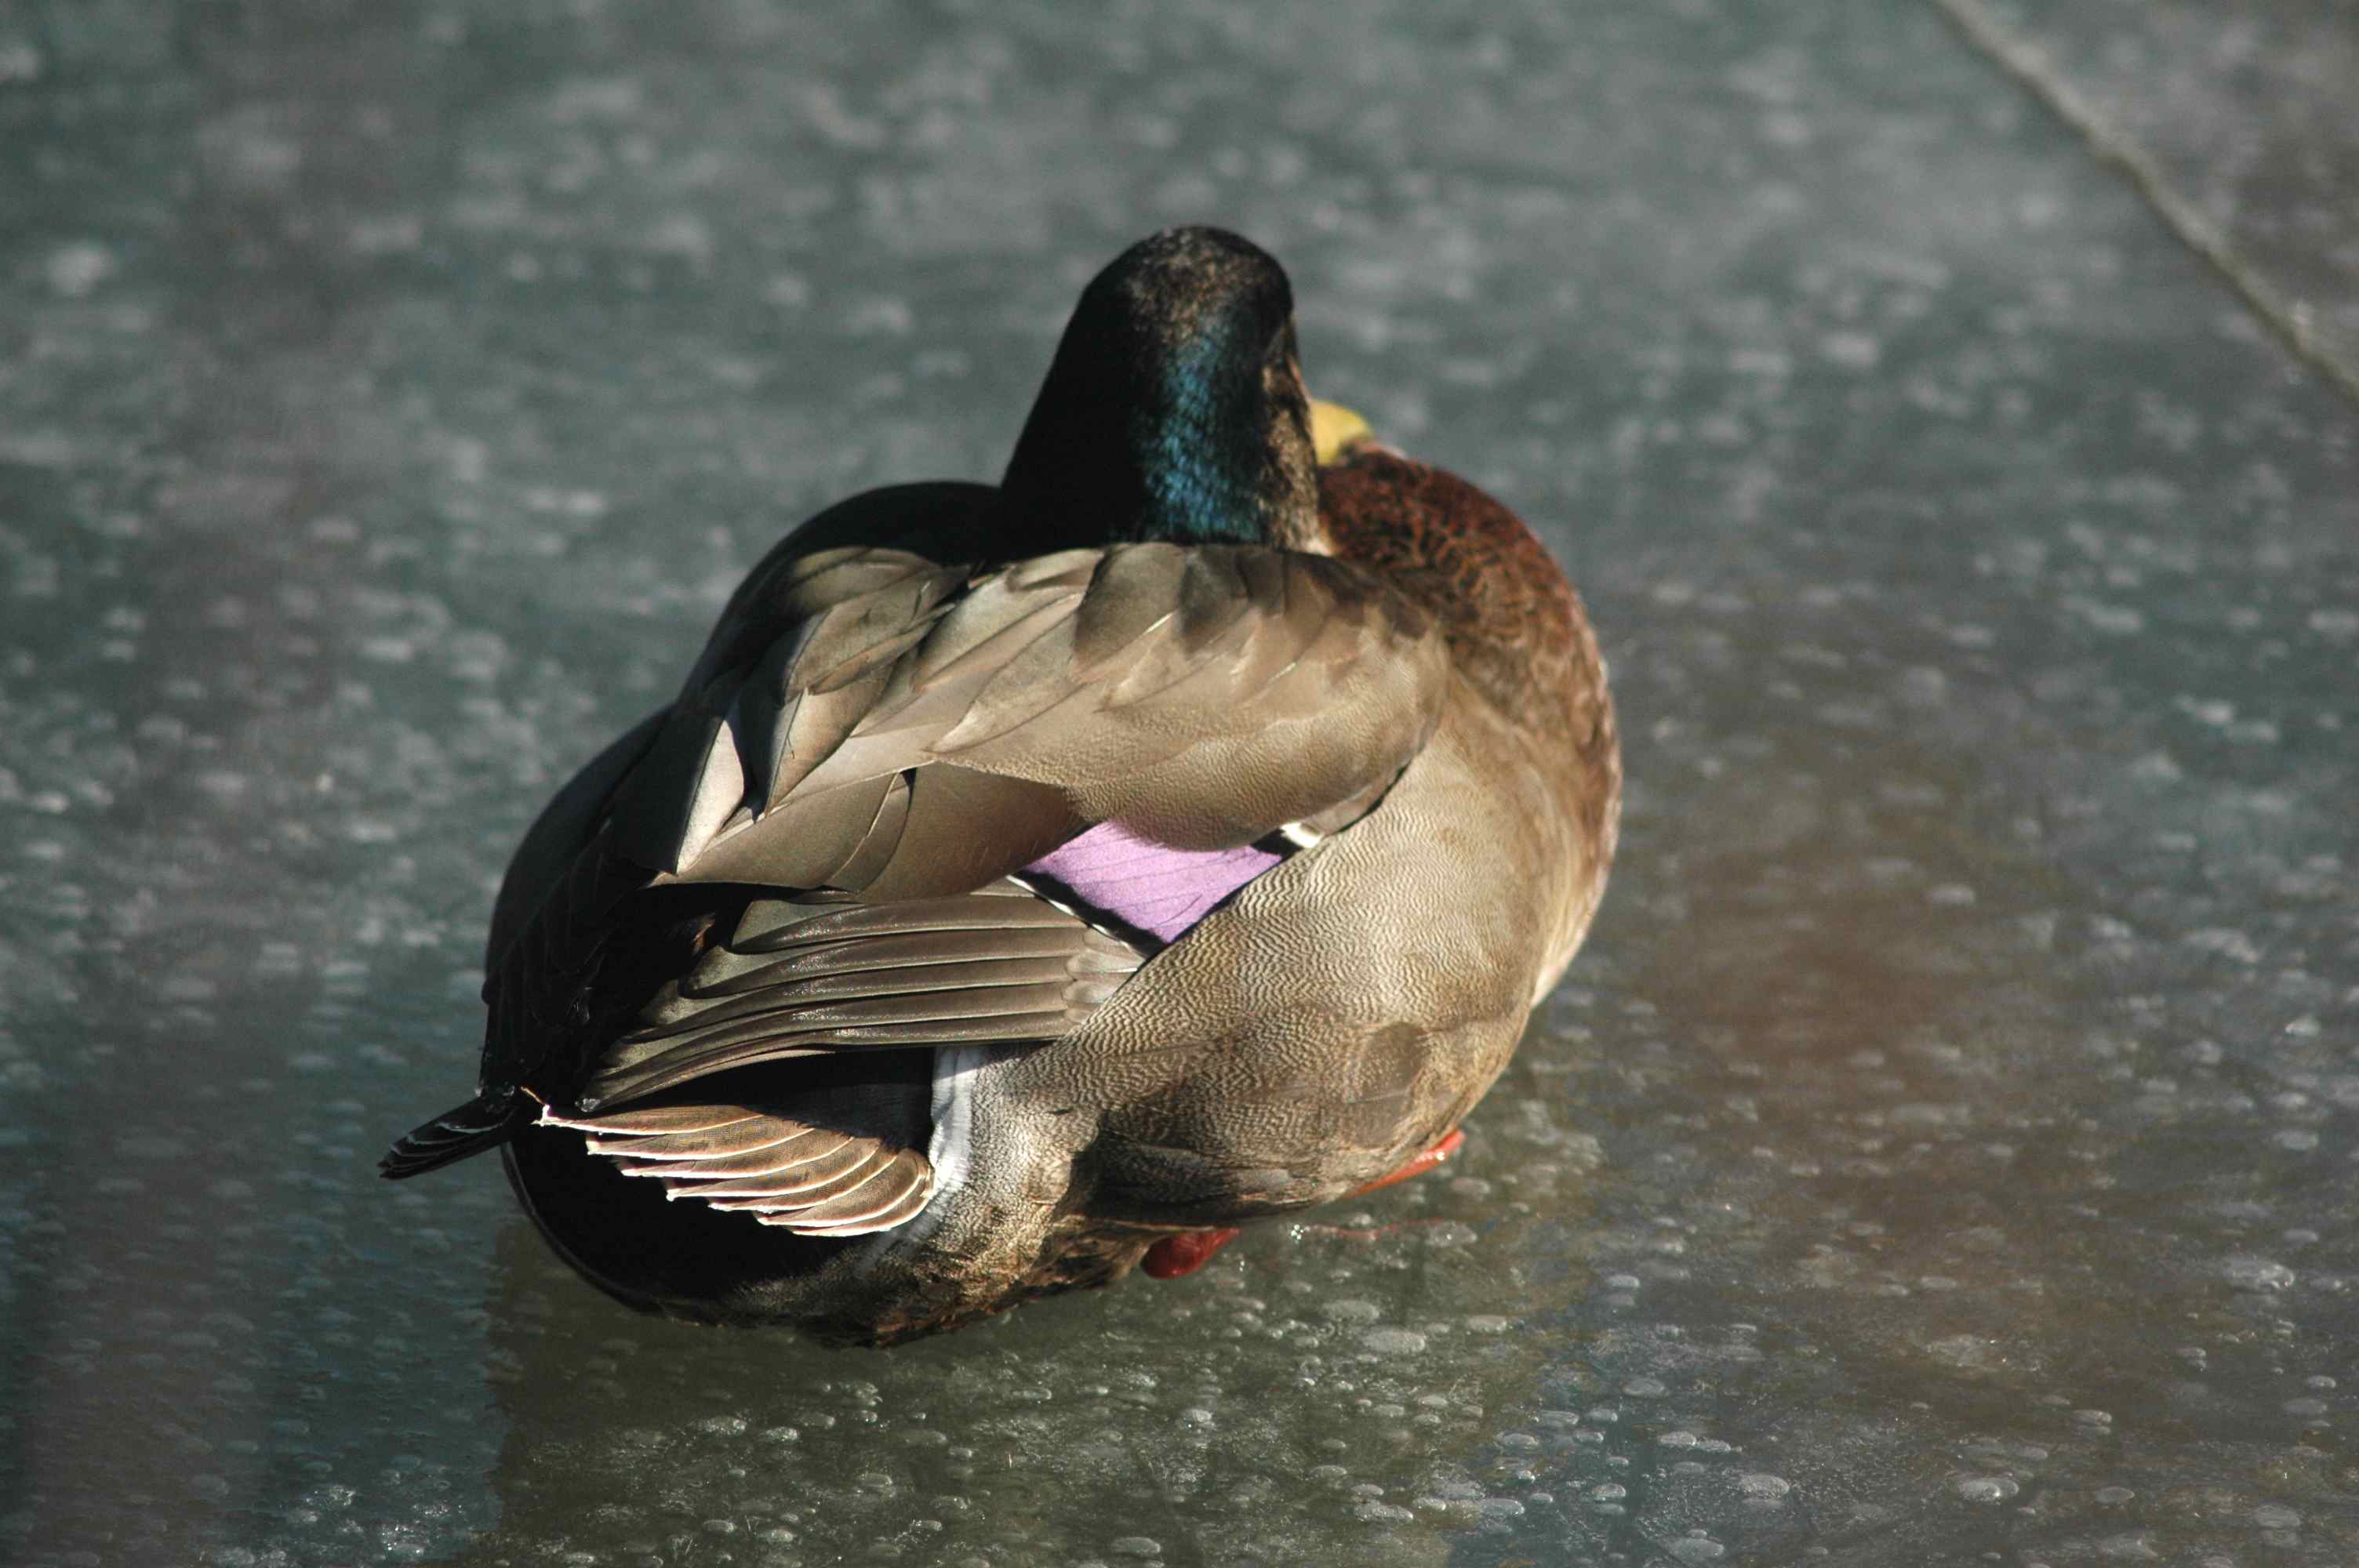 Could ducks in the water melt ice? | Tough Little Birds